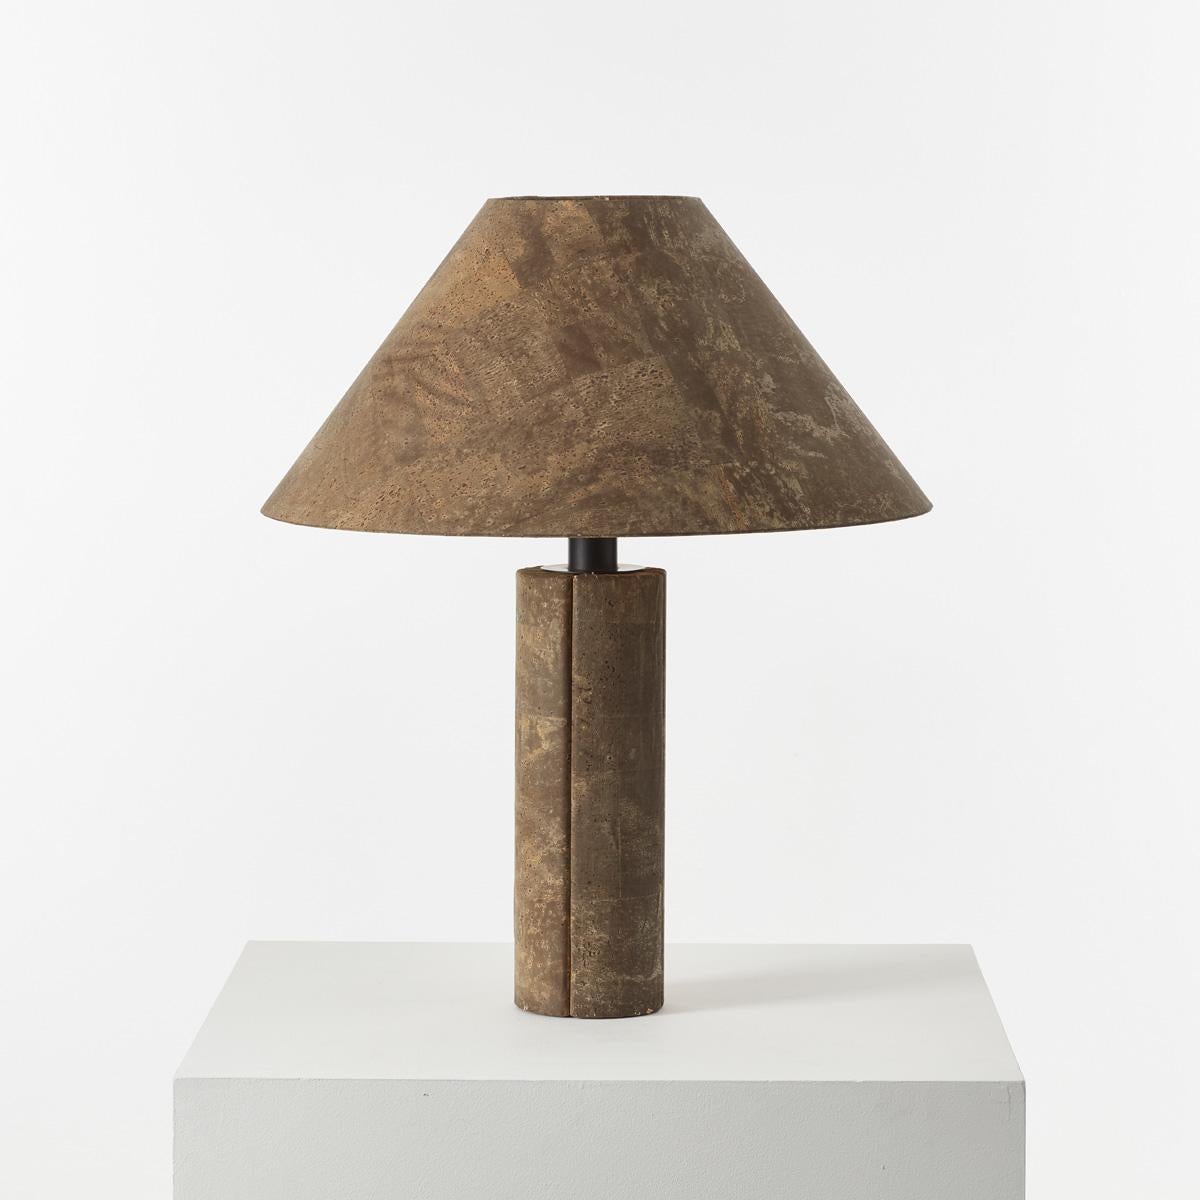 Late 20th Century Pair of Ingo Maurer Cork Lamps for Design M, Germany, 1974